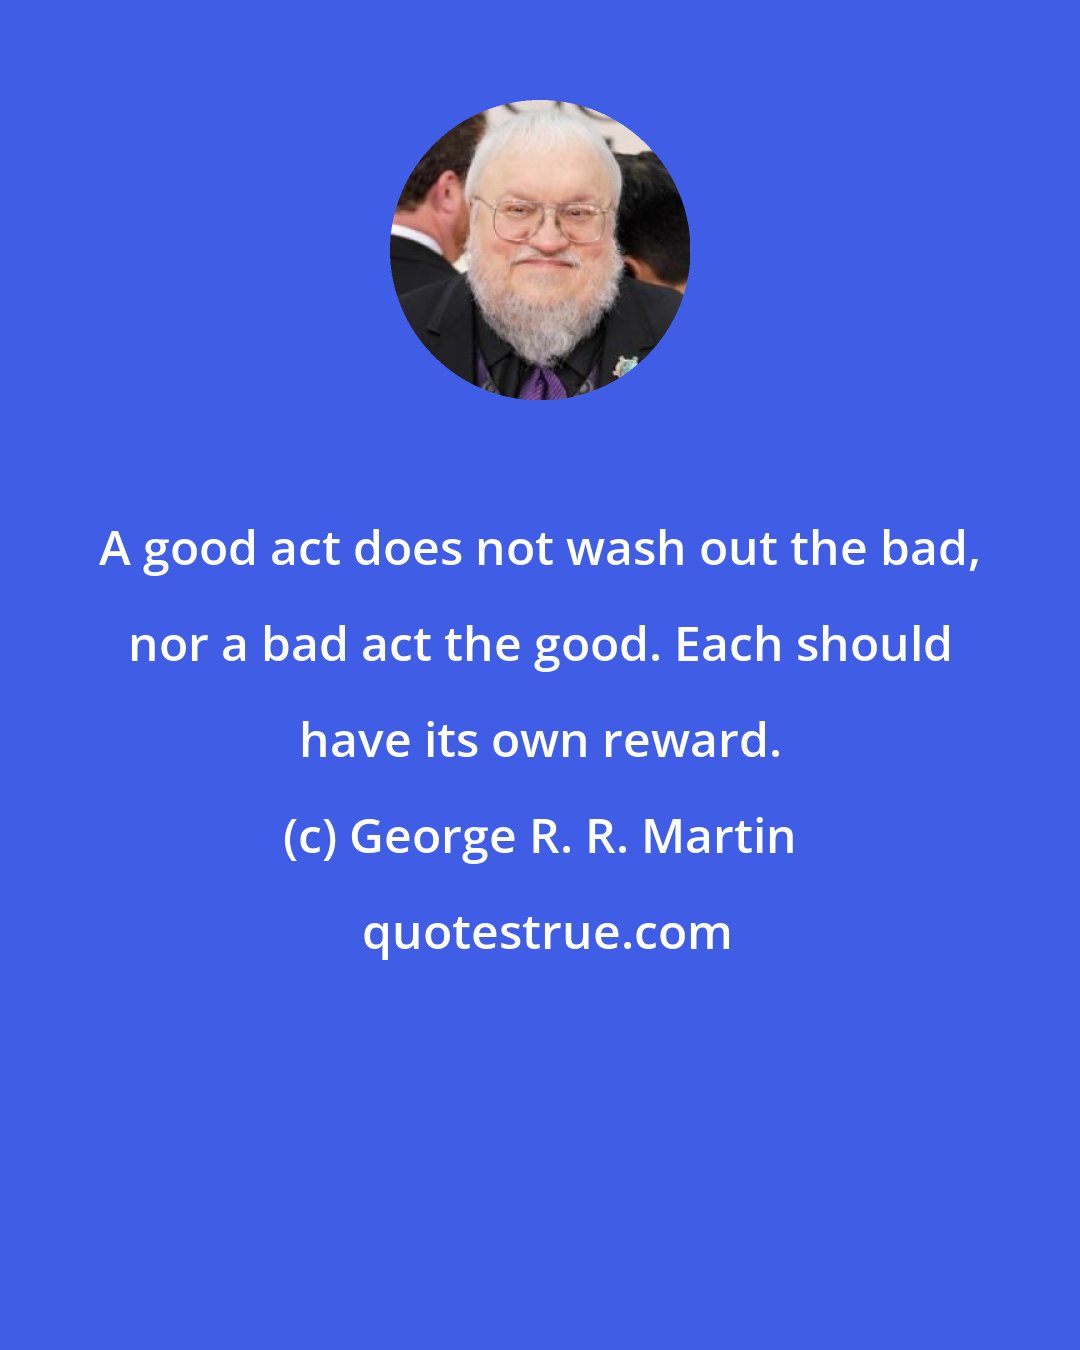 George R. R. Martin: A good act does not wash out the bad, nor a bad act the good. Each should have its own reward.